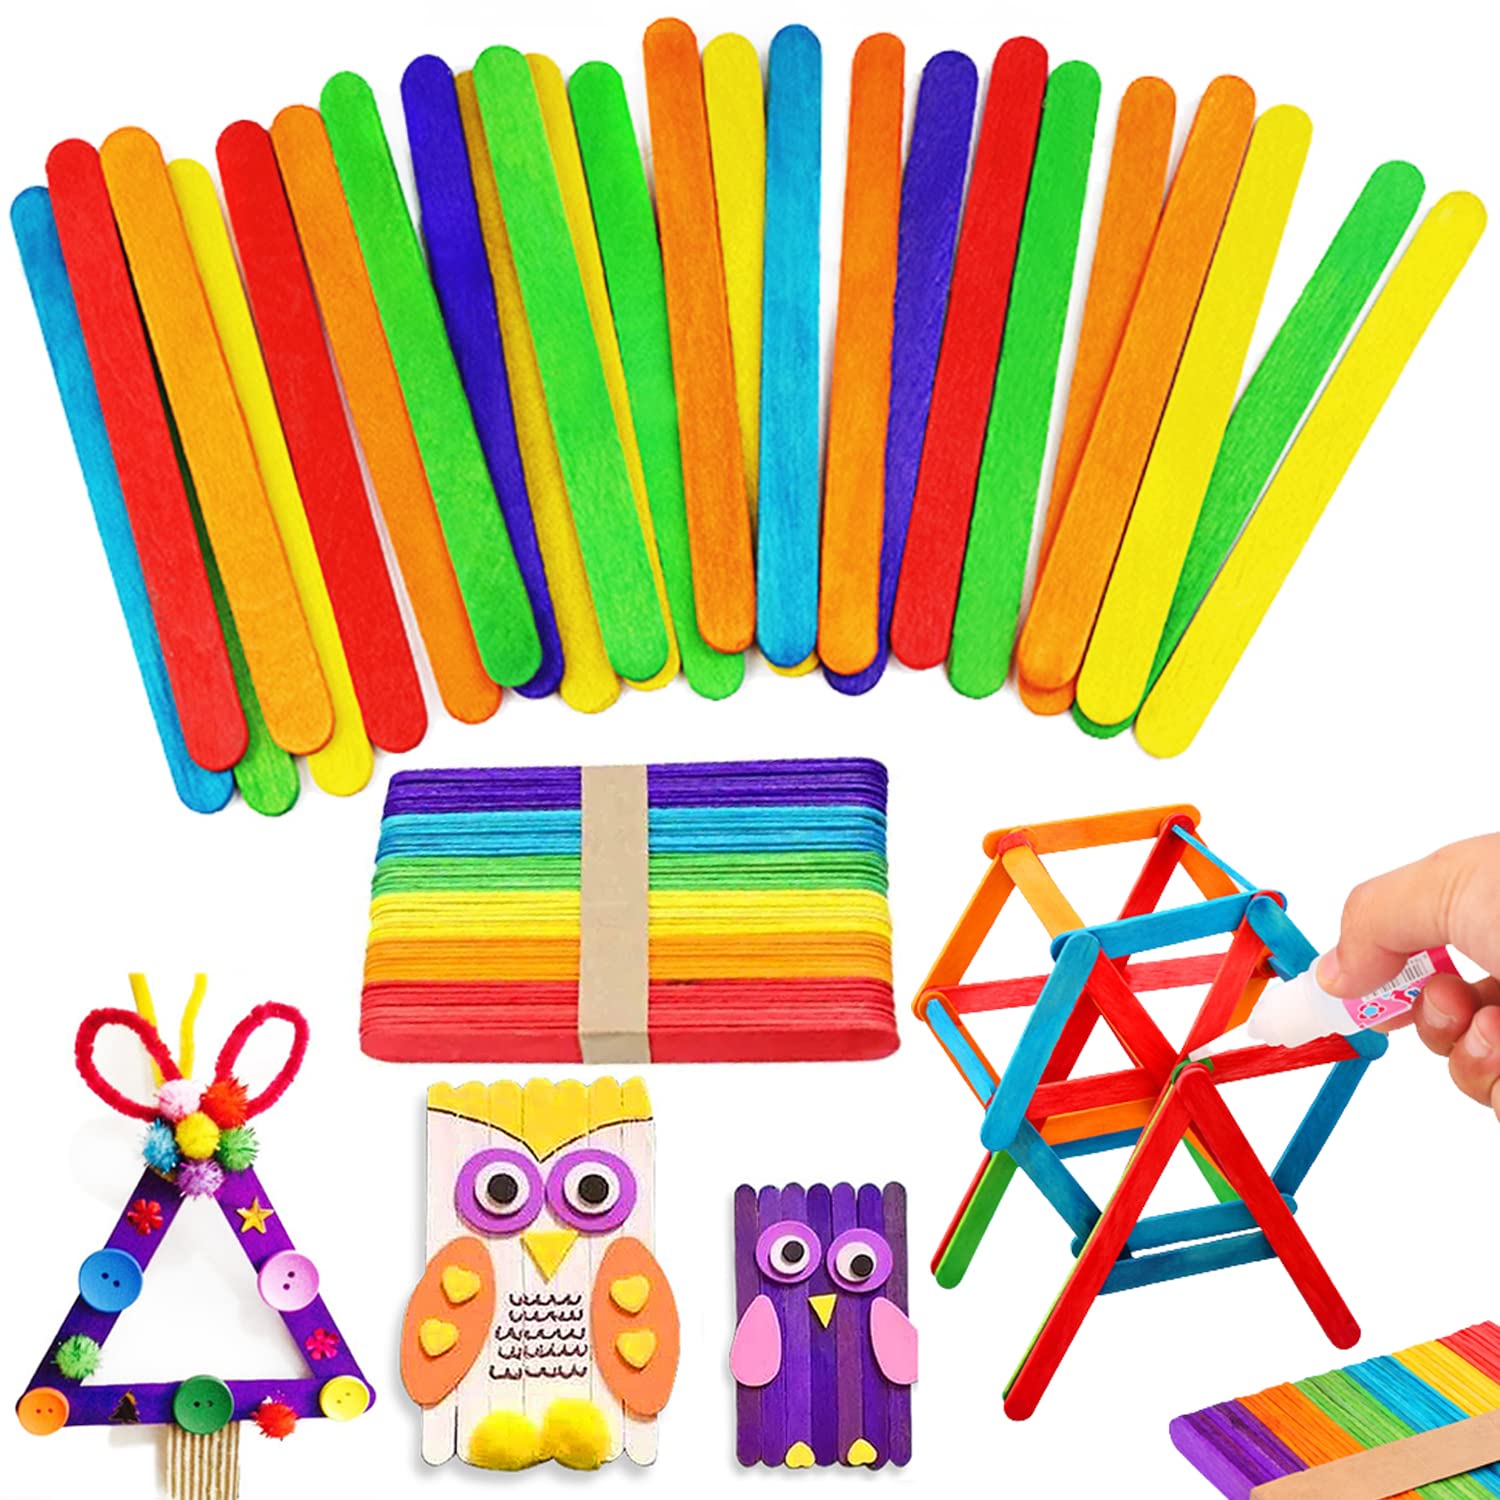 Book Cover 200 PCS Colorful Craft Sticks,Popsicle Ice Pop Ice Cream Sticks,Natural Wooden 4-1/2